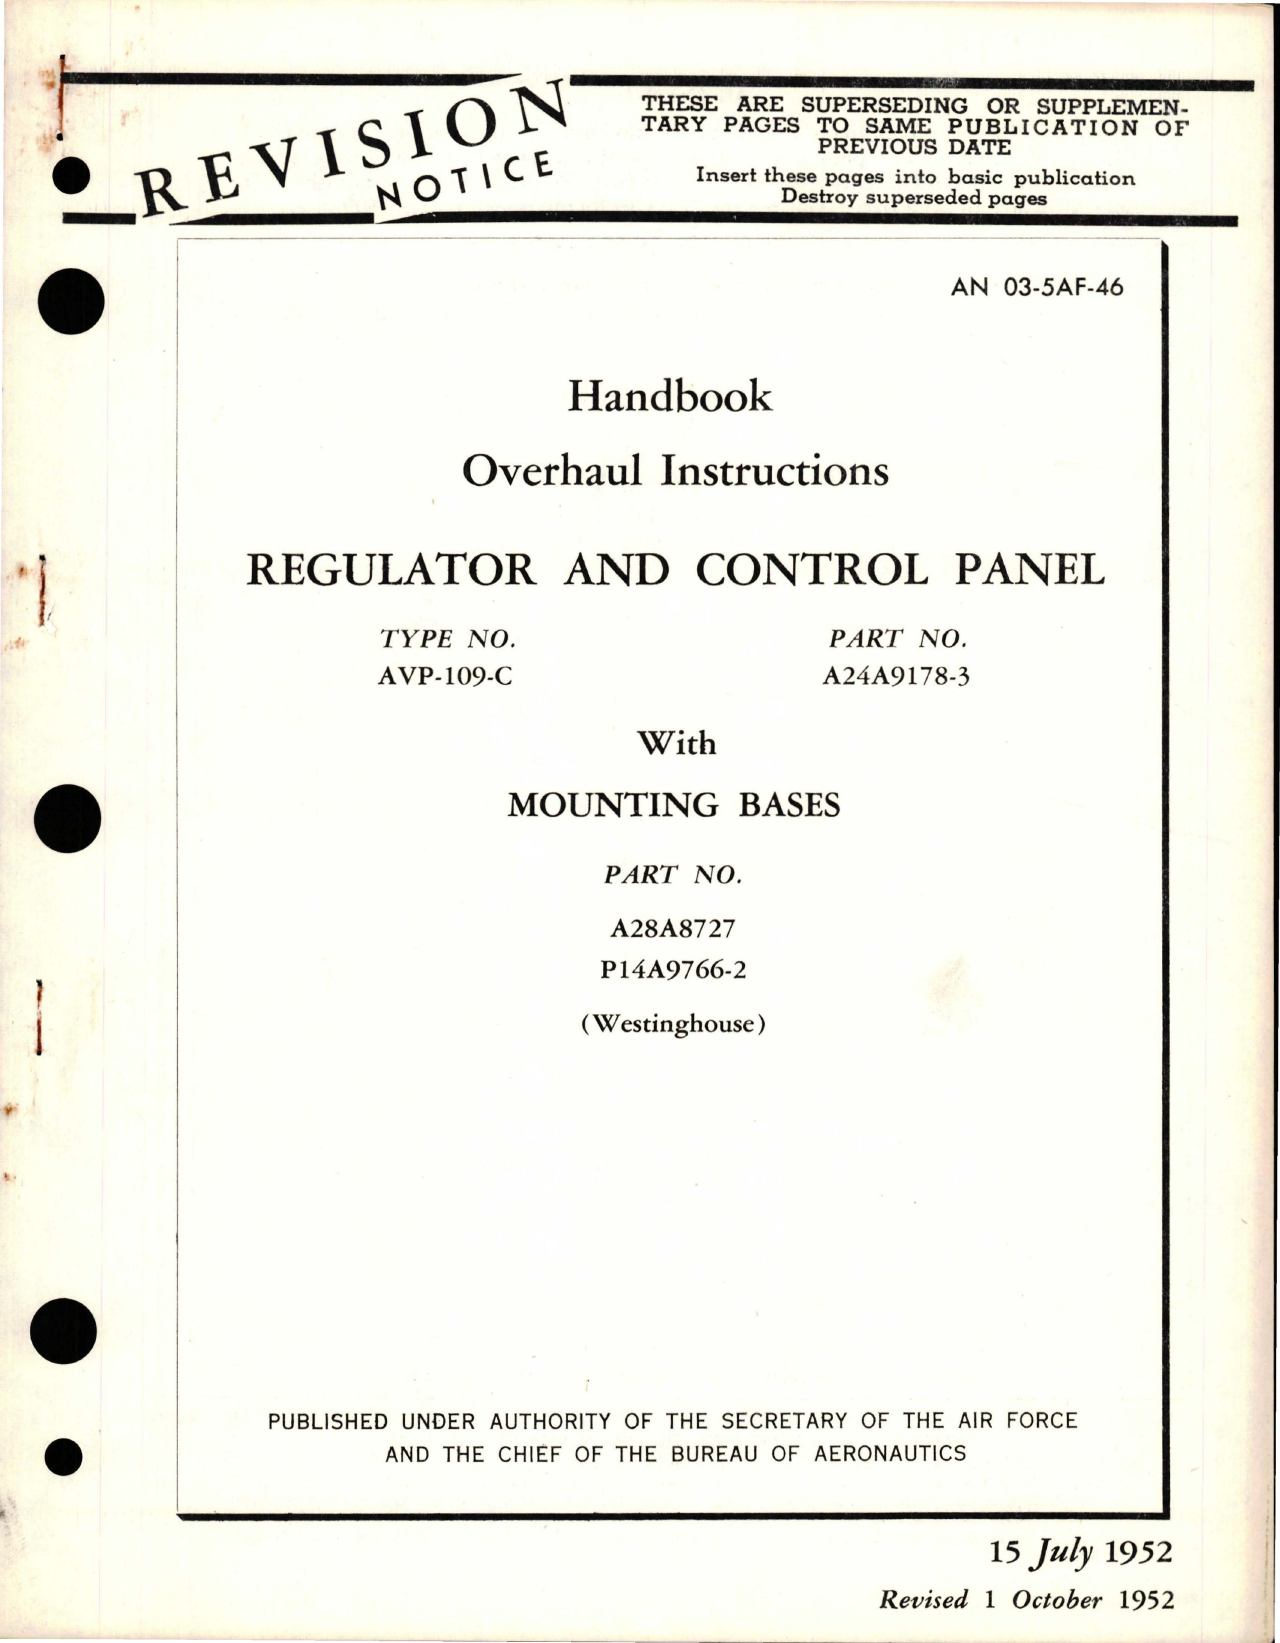 Sample page 1 from AirCorps Library document: Overhaul Instructions for Regulator and Control Panel with Mounting Bases - Type AVP-109-C